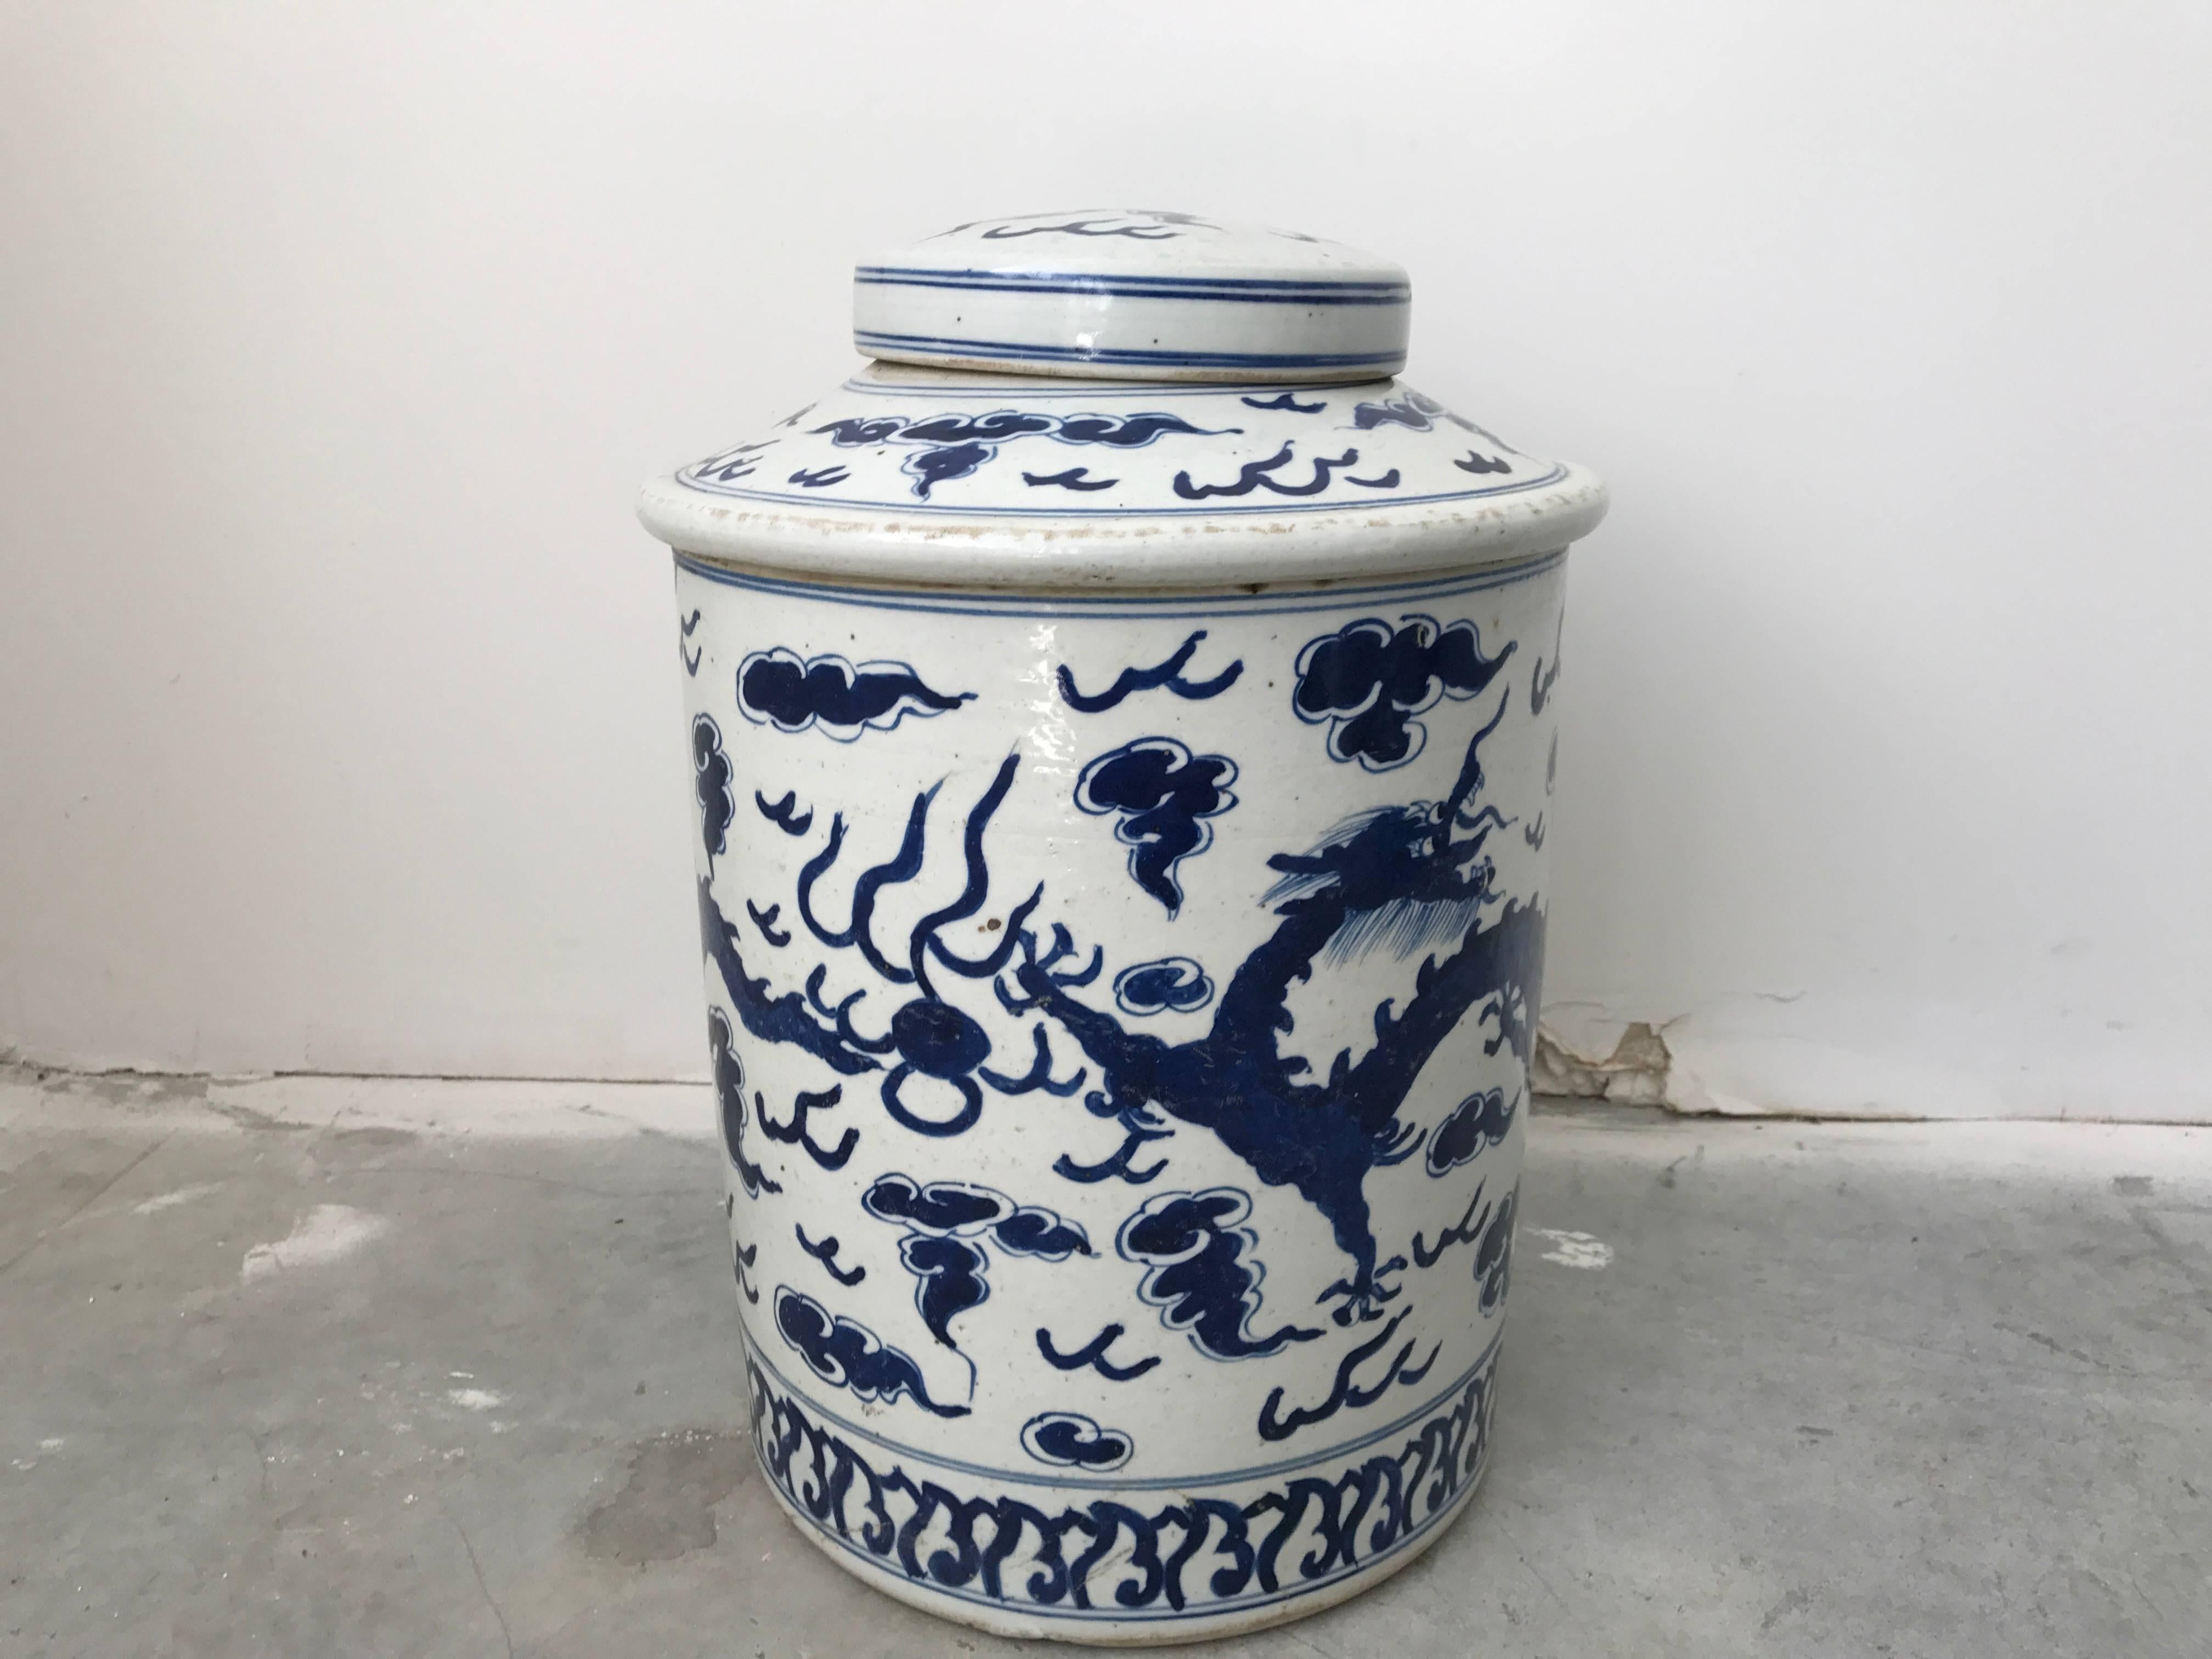 Offered is a gorgeous, large late 19th century blue and white ginger jar urn with a dragon motif on all sides.